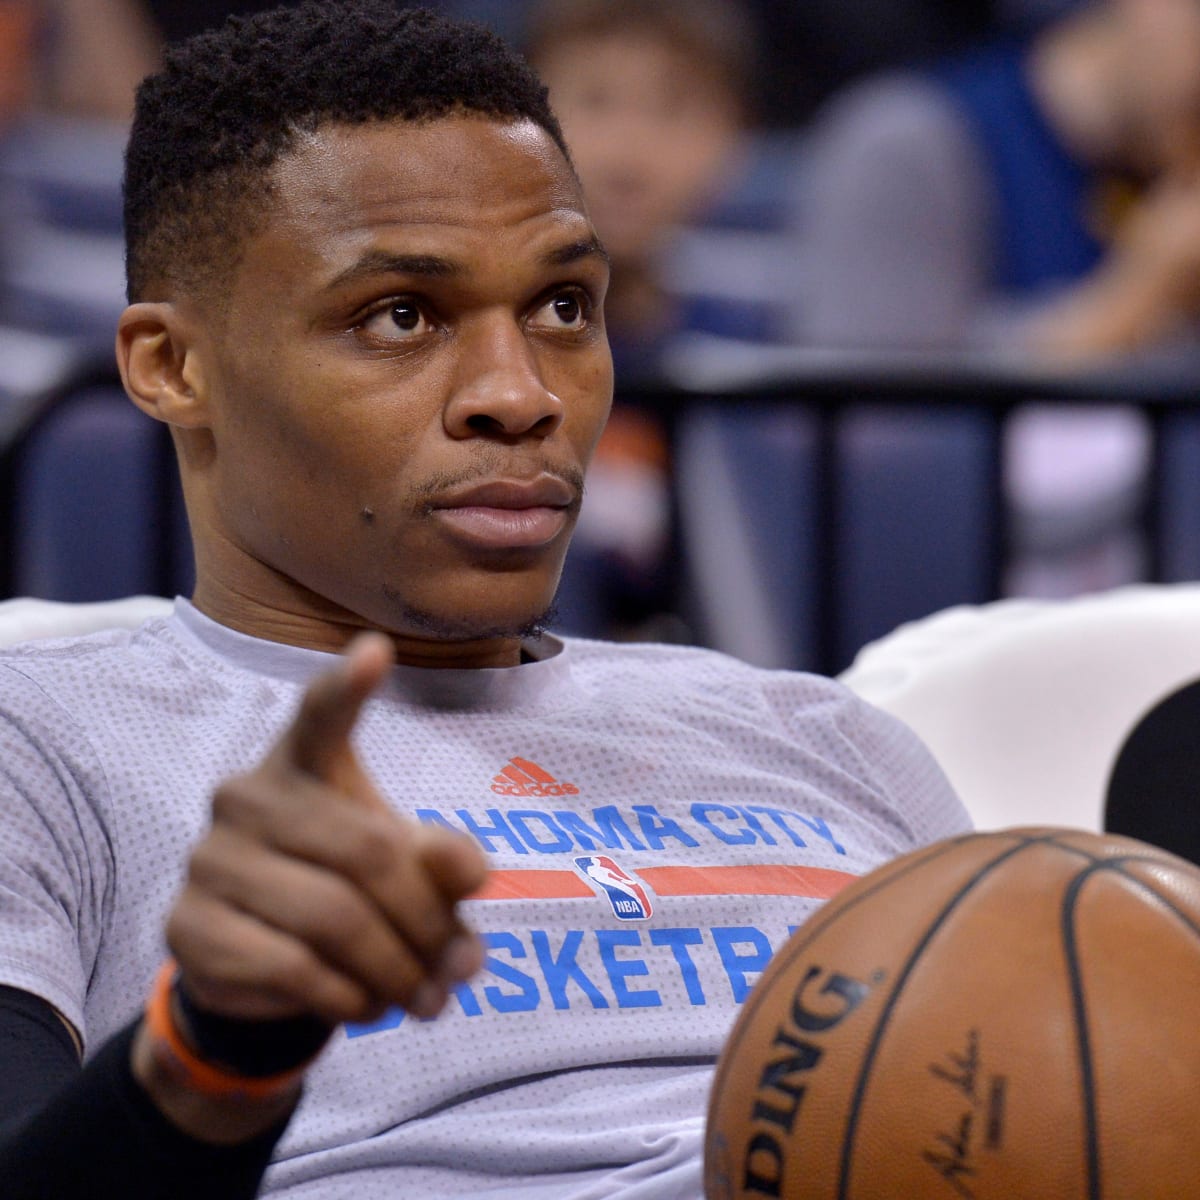 𝐓𝐚𝐥𝐤𝐢𝐧' 𝐍𝐁𝐀 on X: People tend to forget that Russell Westbrook  was drafted by the Seattle Supersonics and not by the OKC Thunder / X